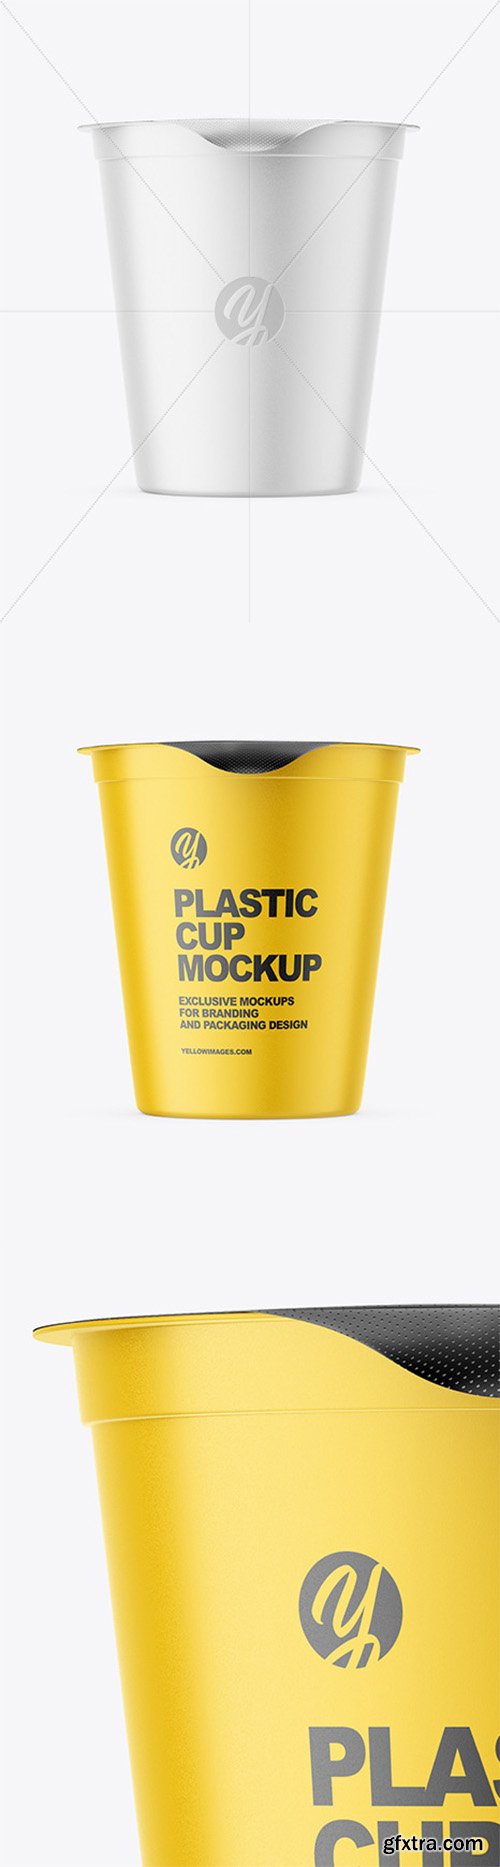 Download Download Box Recycled Mockup Potoshop Yellowimages Mockups